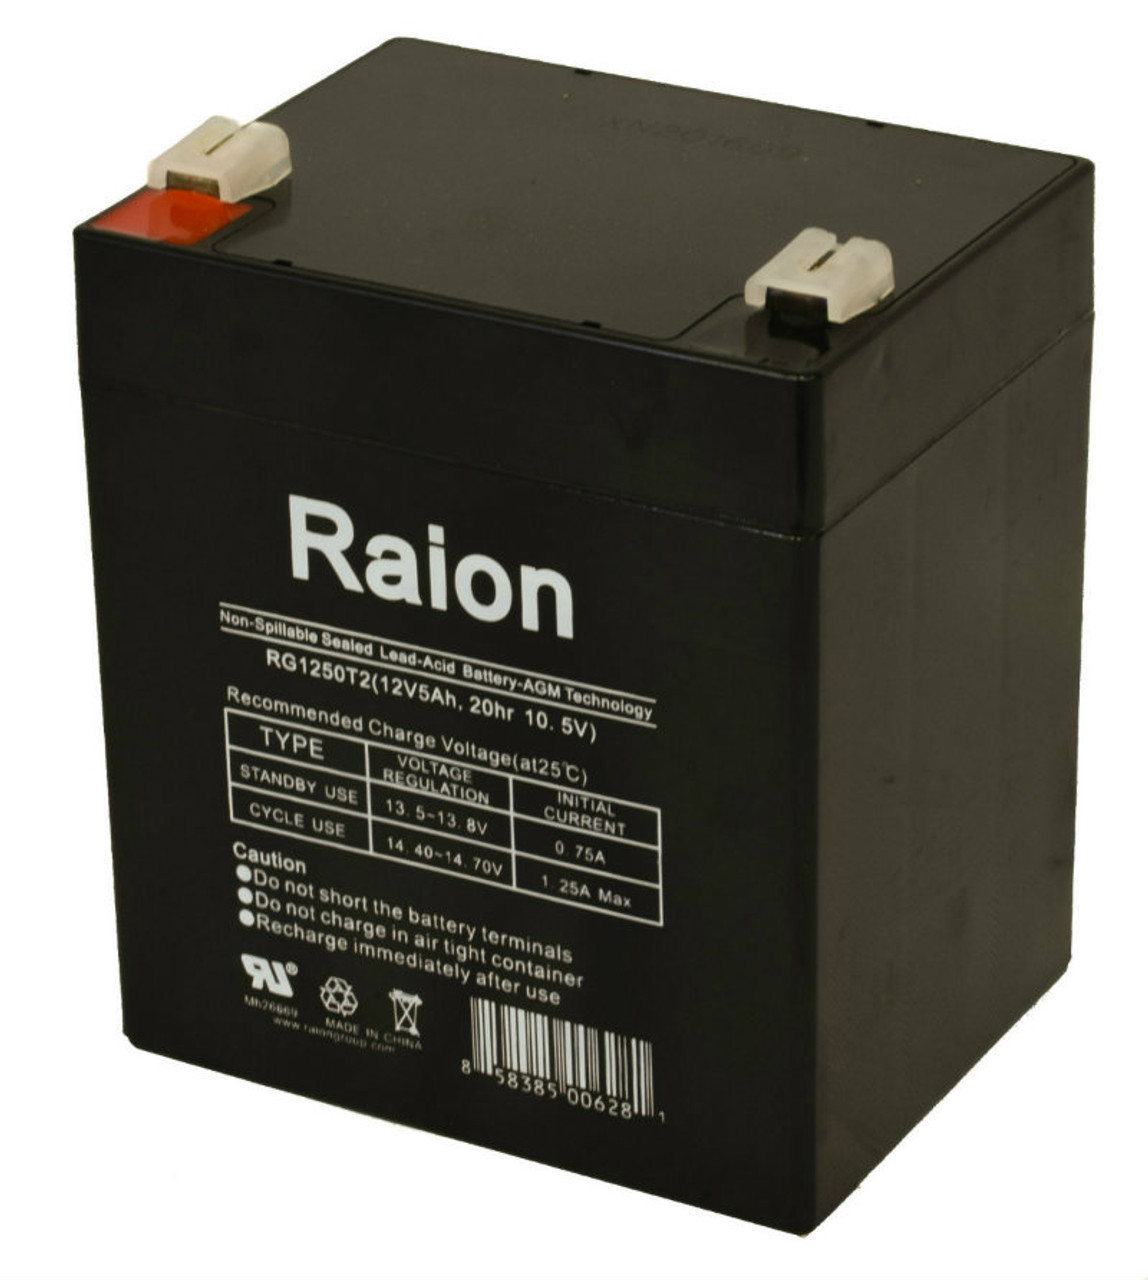 Raion Power RG1250T2 Replacement Battery for Costzon 12V Licensed Aprilia Electric Kids Motorcycle Ride On